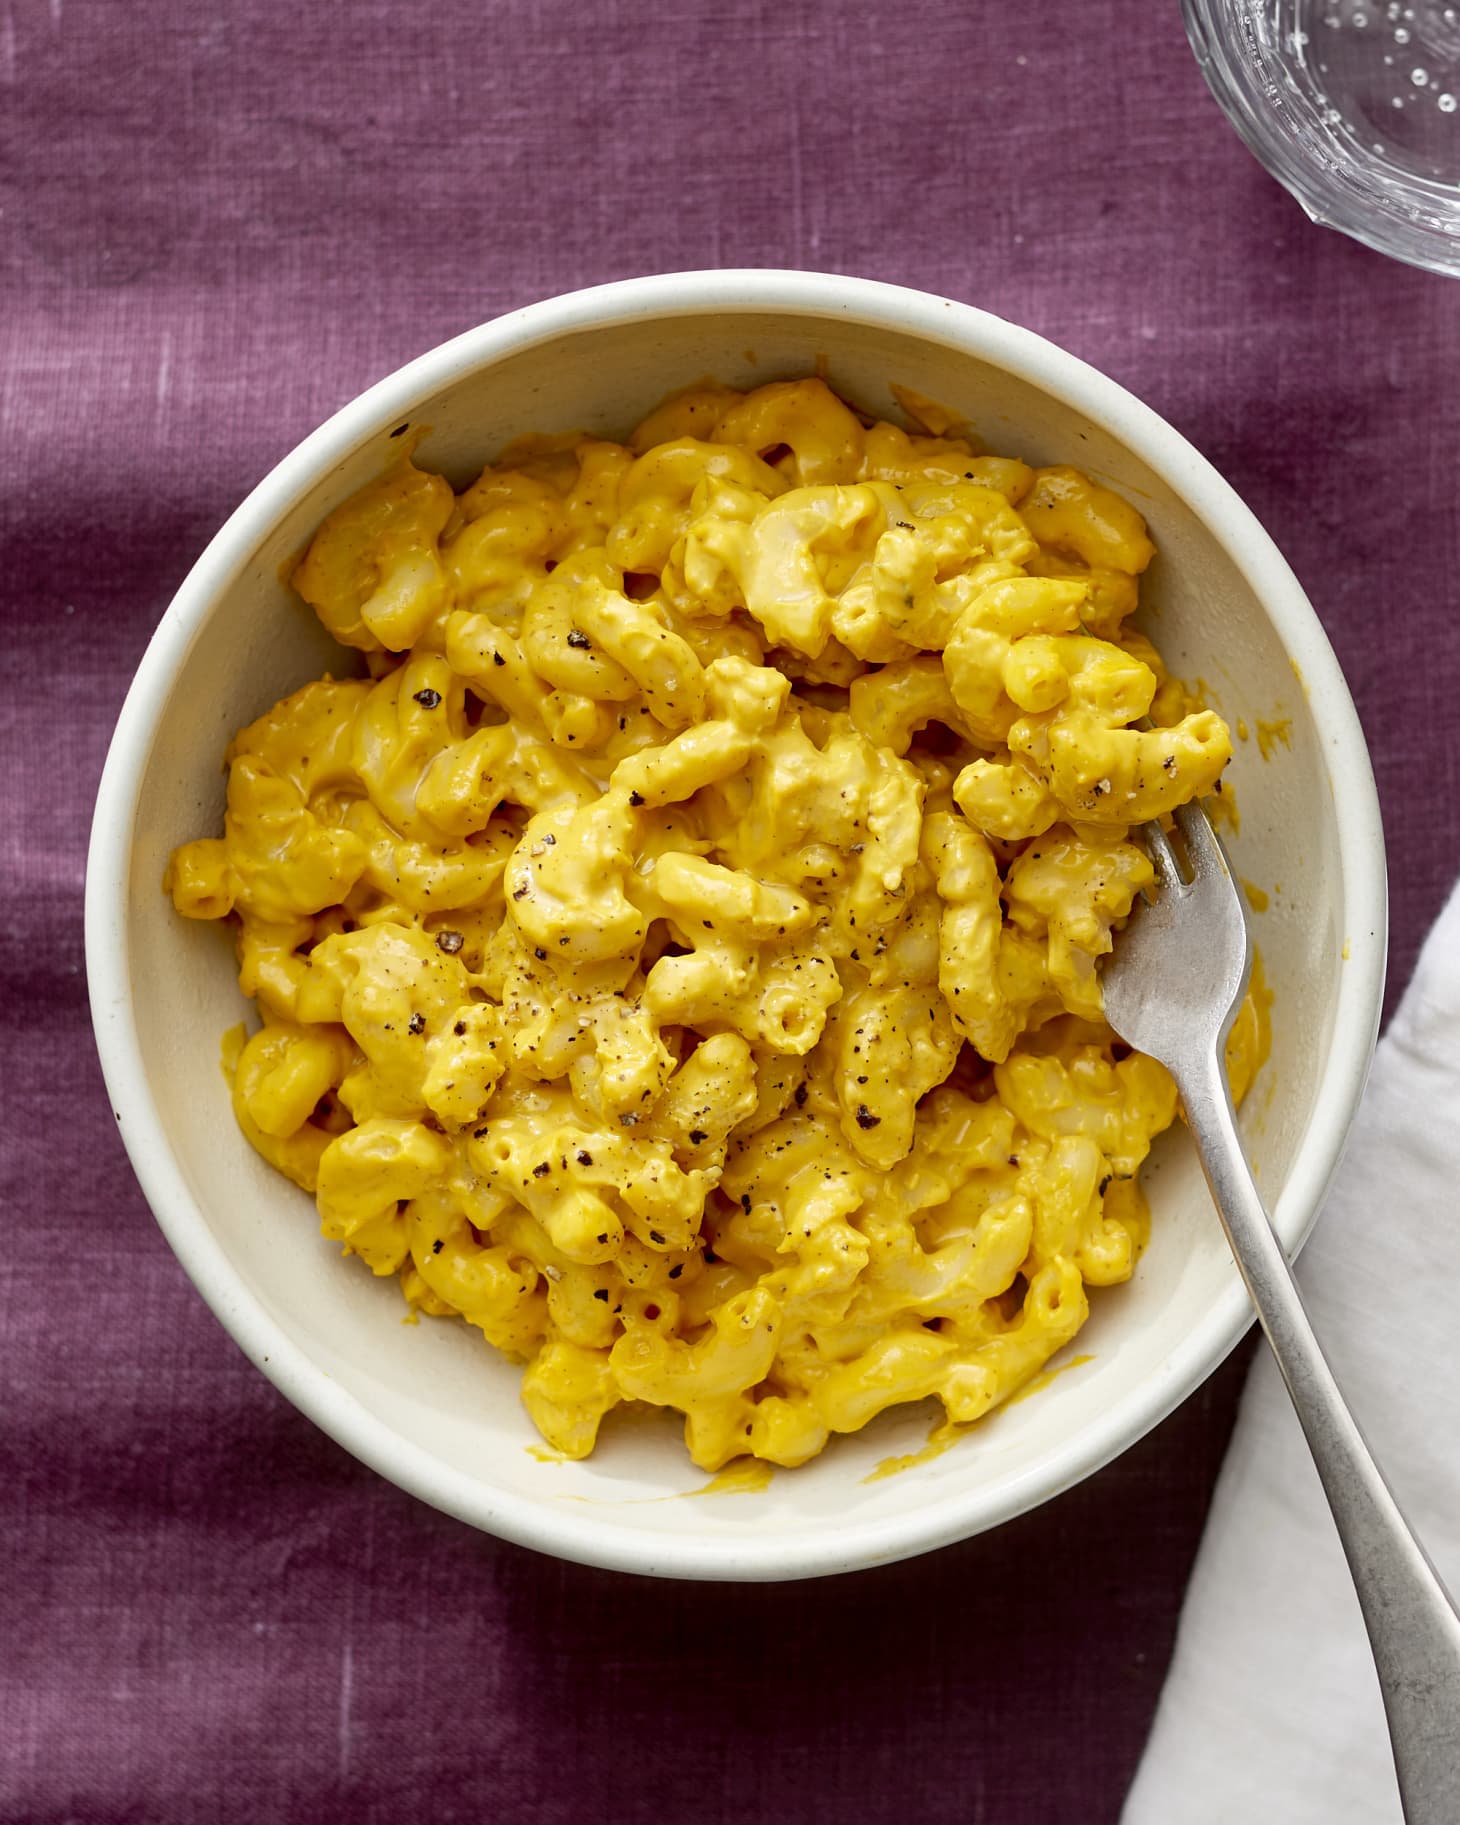 How To Make the Ultimate Vegan Mac and Cheese | Kitchn